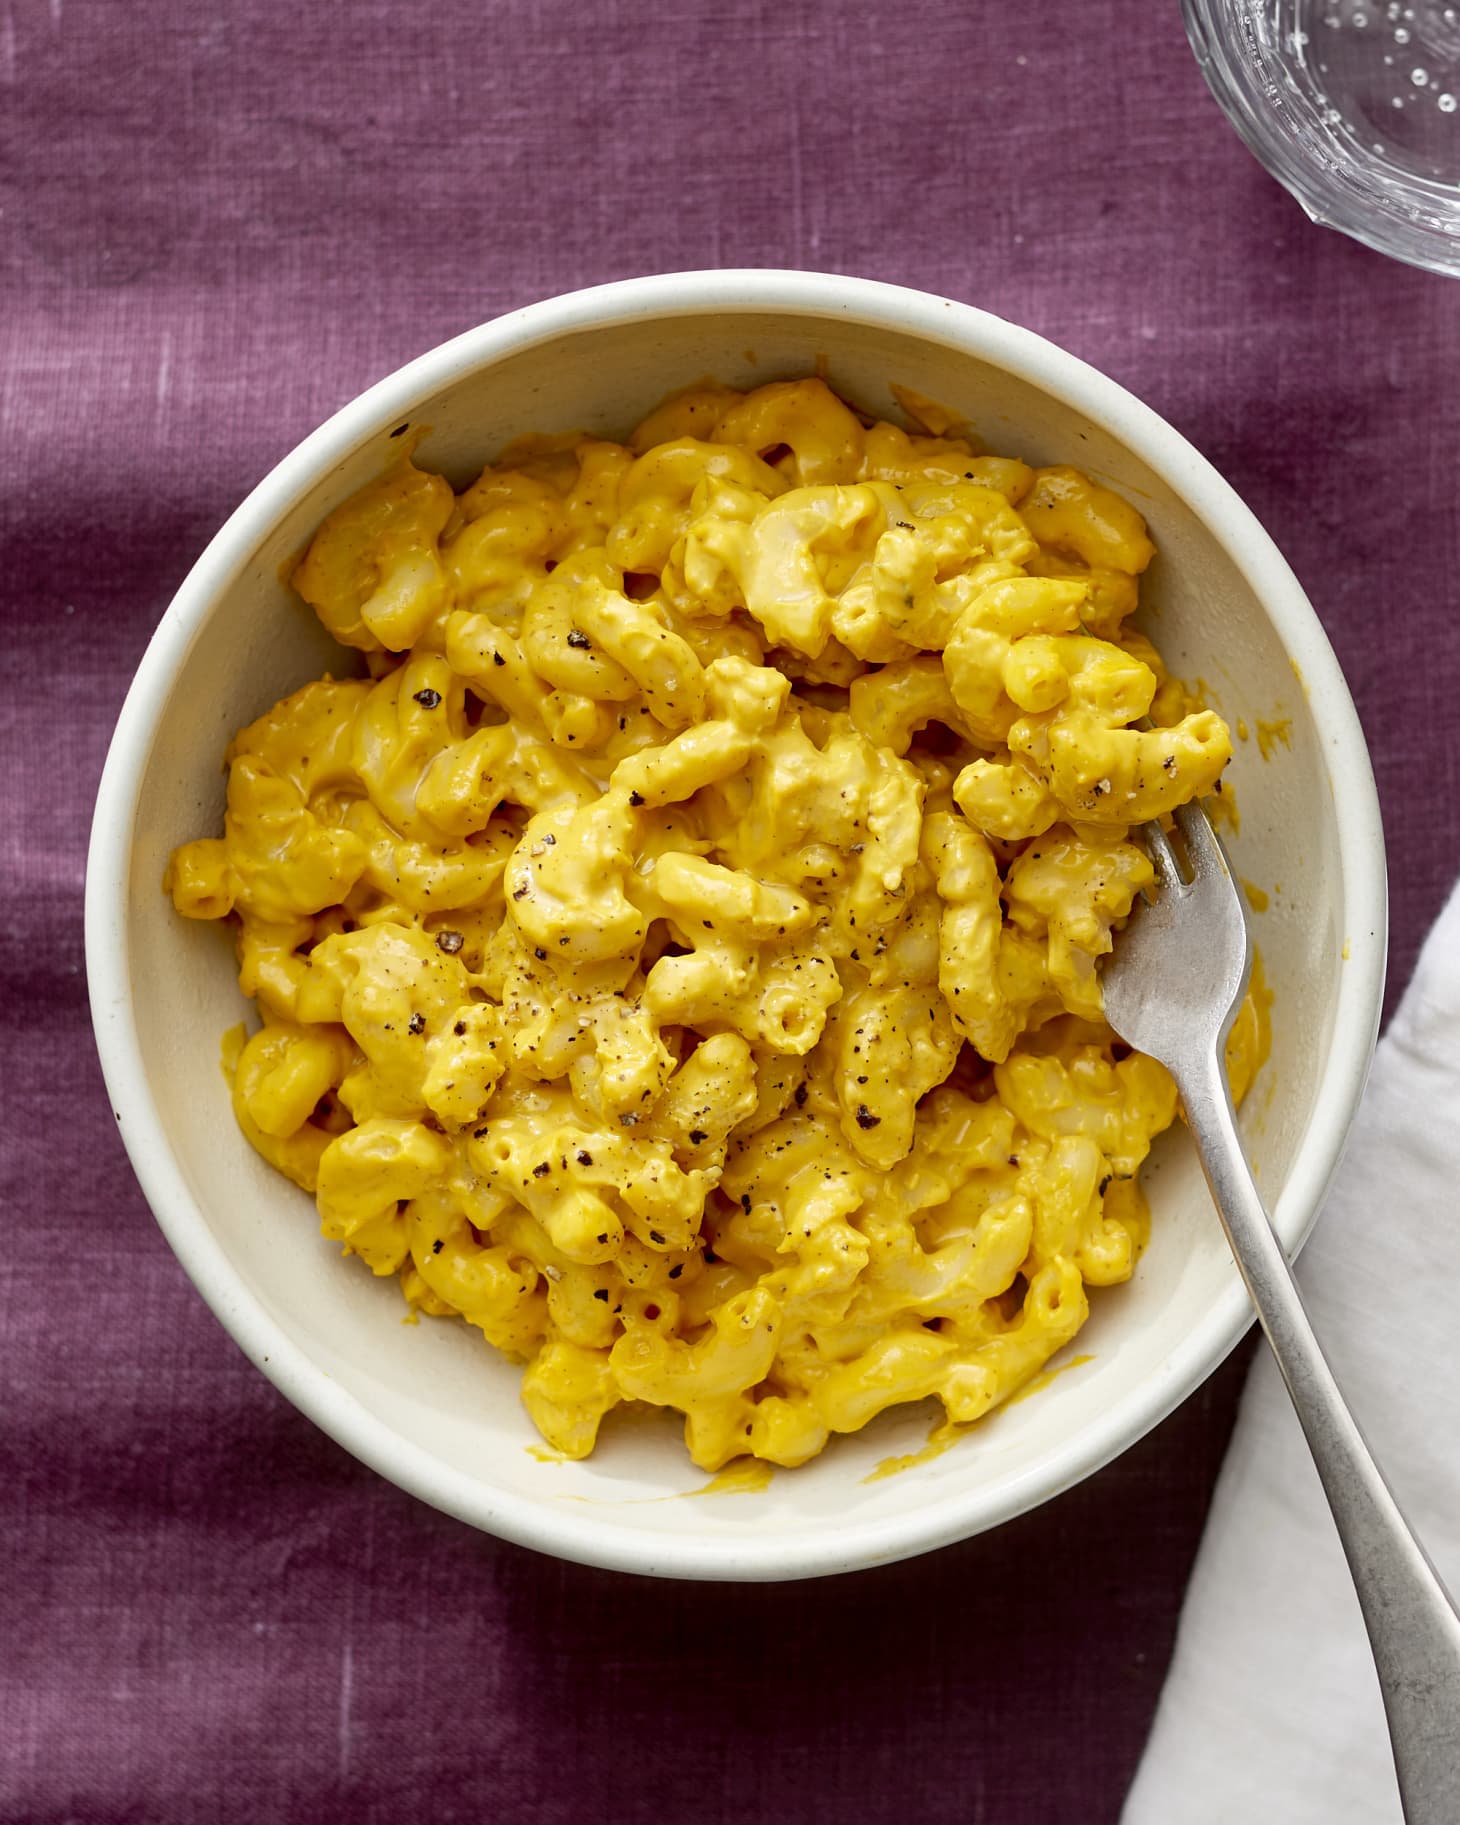 How To Make the Ultimate Vegan Mac and Cheese | Kitchn